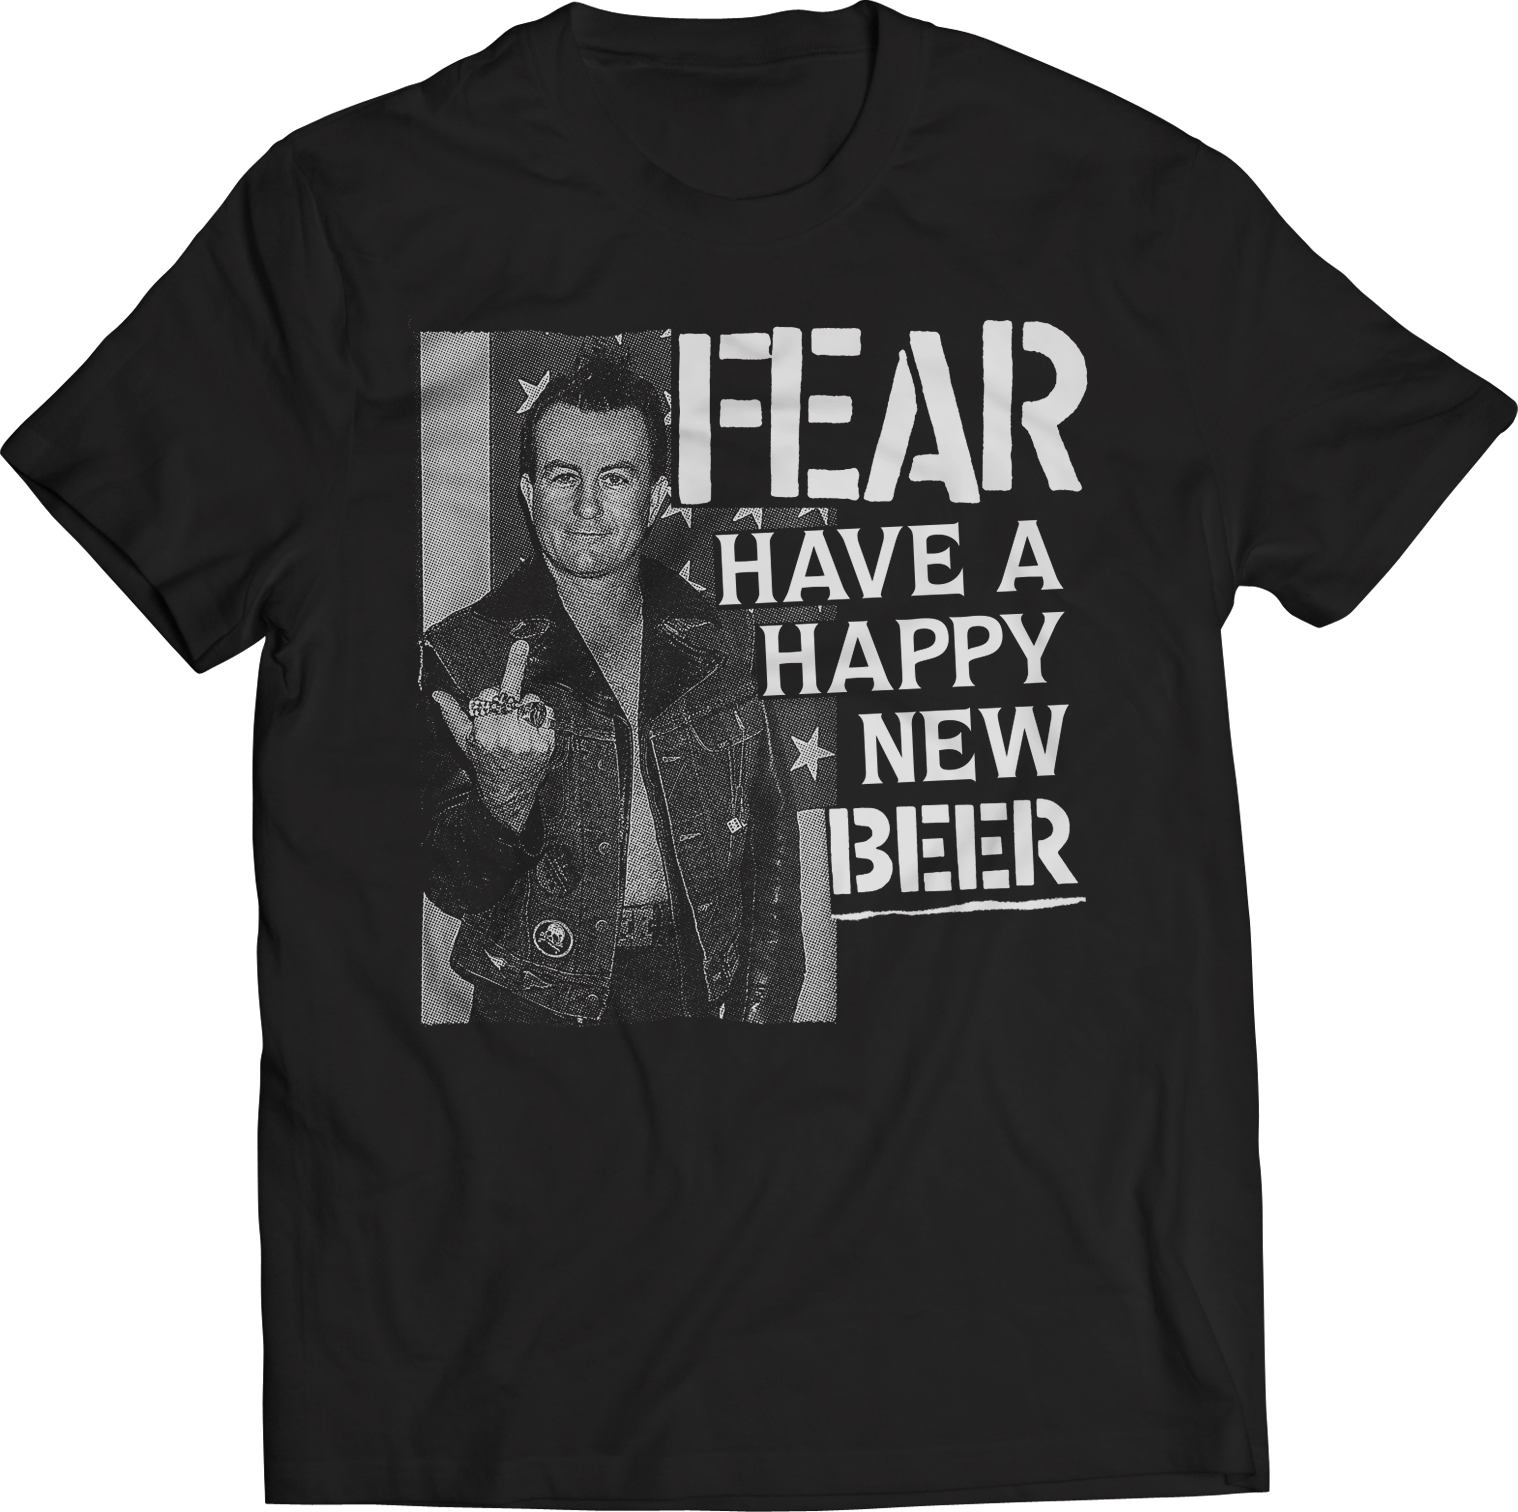 FEAR "HAPPY NEW BEER" T-SHIRT